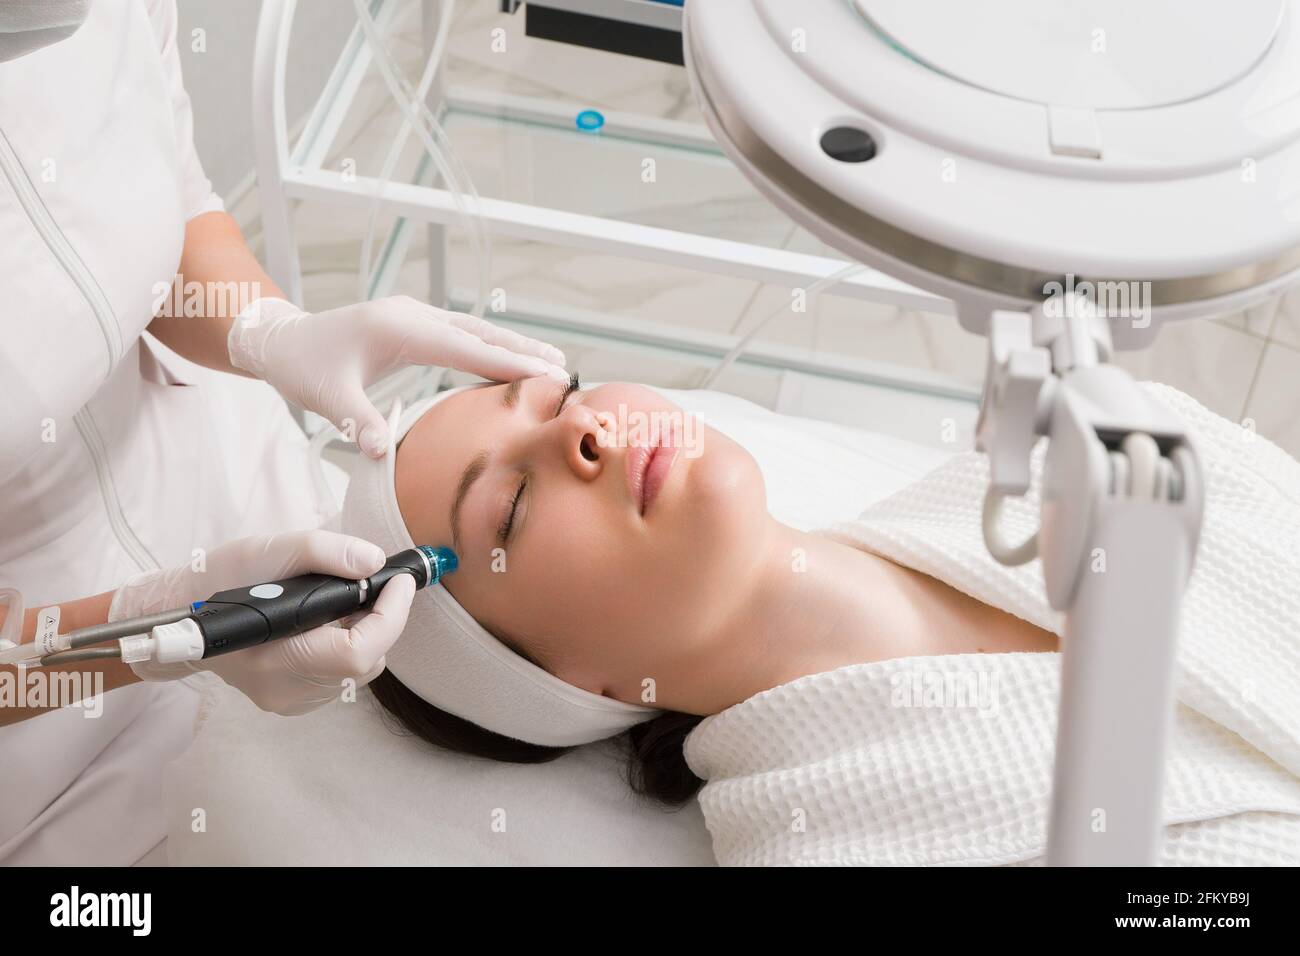 A woman receives laser treatment of the face in a cosmetology clinic, a concept of skin rejuvenation is being developed. laser peeling Stock Photo